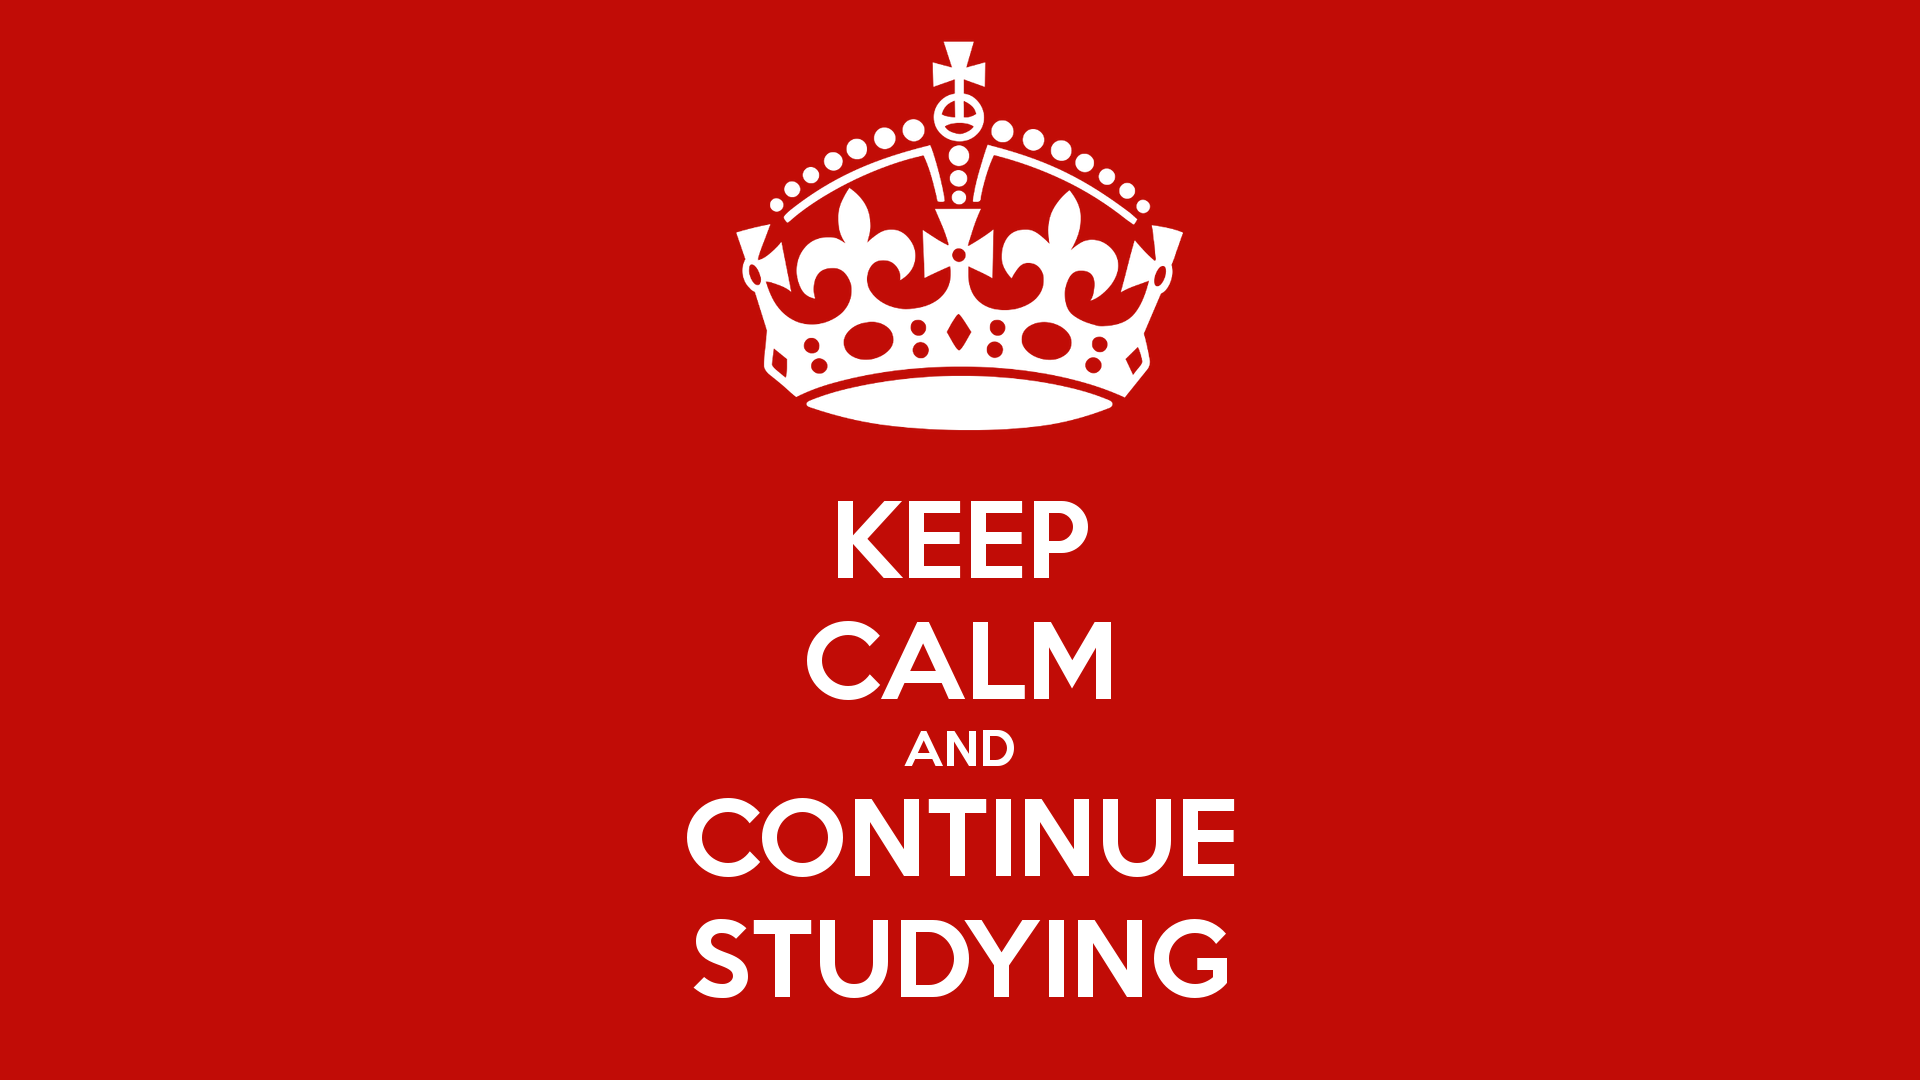 KEEP CALM AND CONTINUE STUDYING CALM AND CARRY ON Image